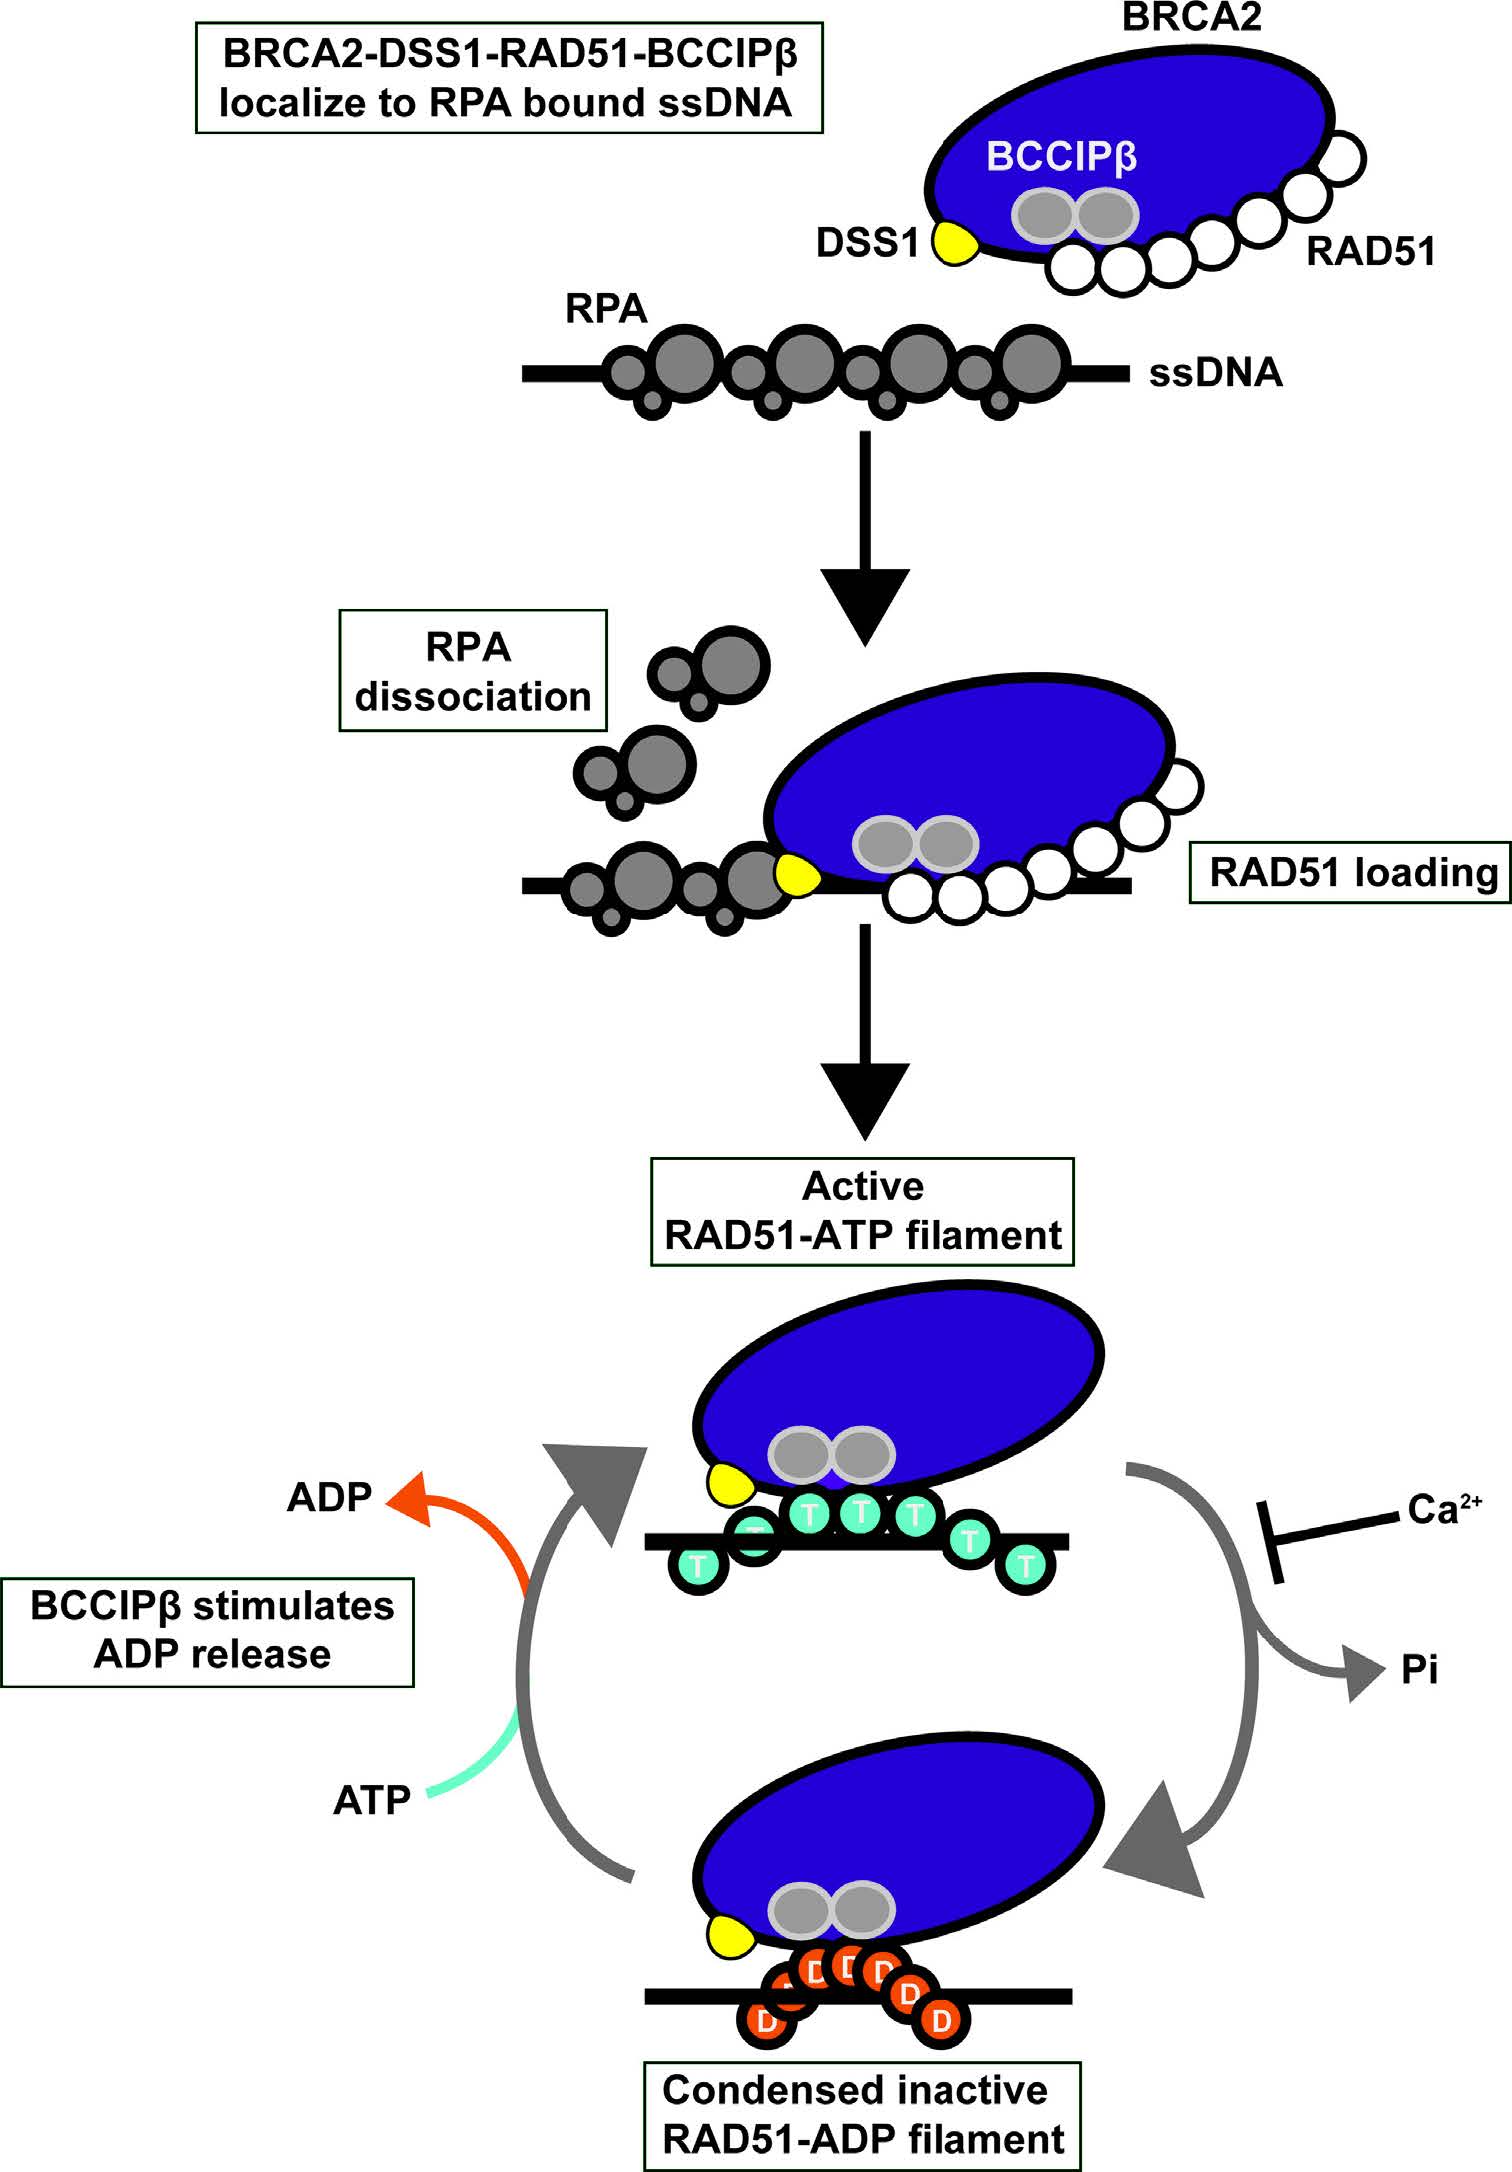 The B-isoform of BCCIP promotes ADP release from the RAD51 presynaptic filament and enhances homologous DNA pairing